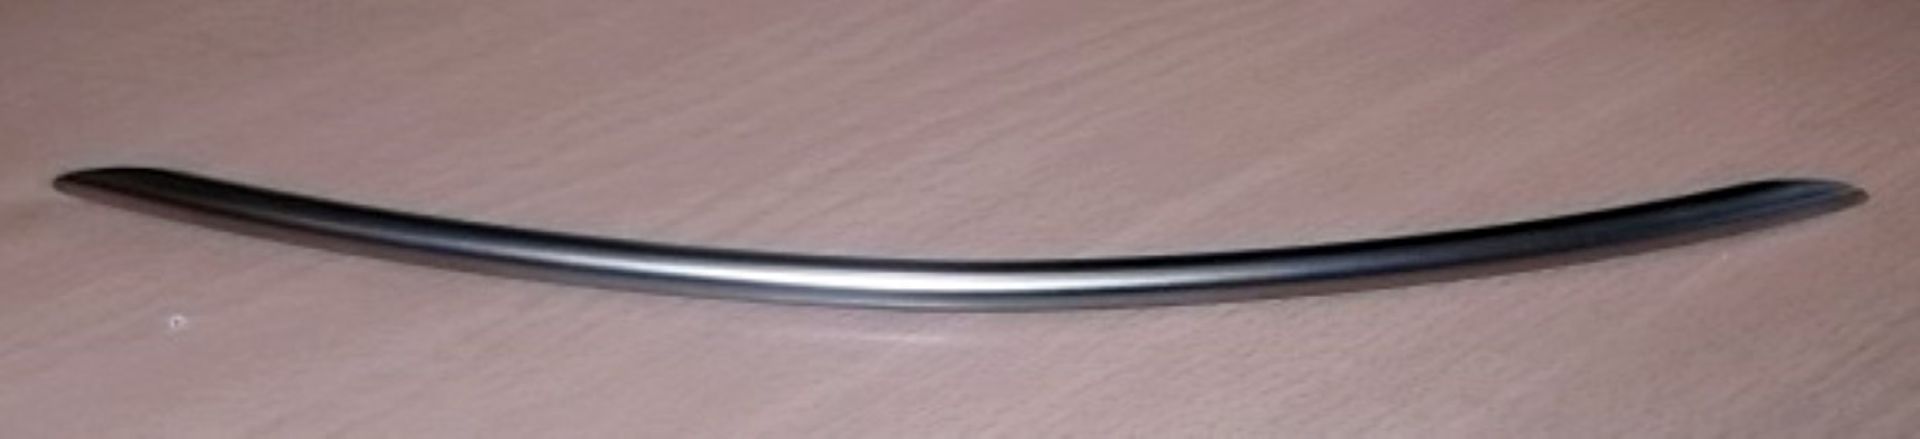 100 x BOW Handle Kitchen Door Handles By Crestwood - 320mm - New Stock - Brushed Nickel Finish - - Image 5 of 10